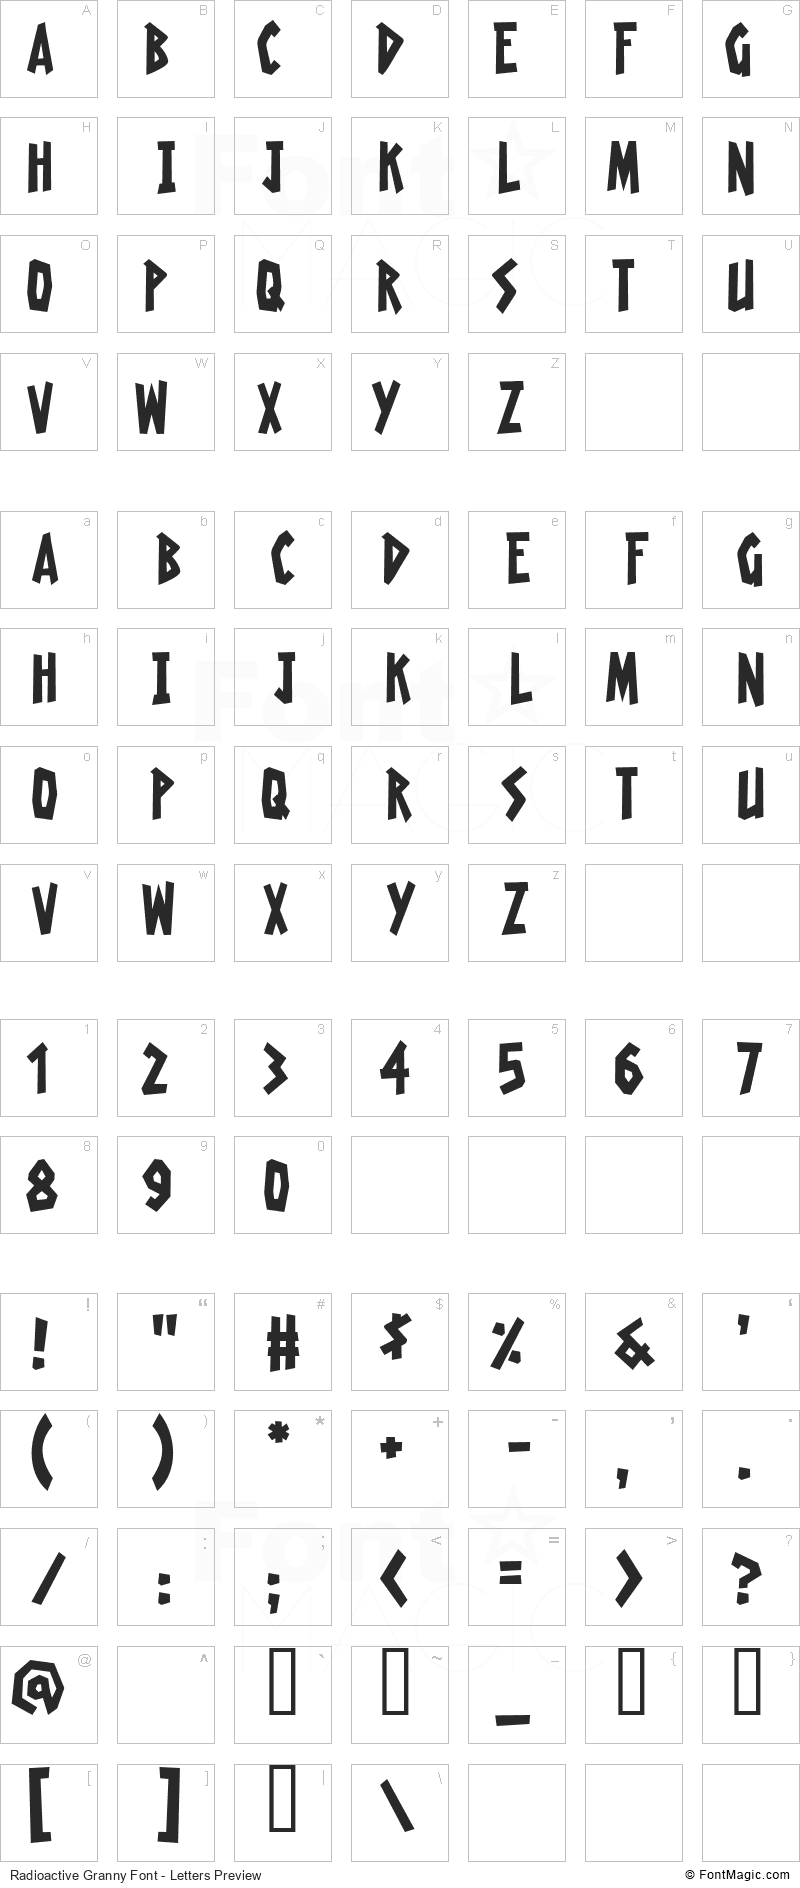 Radioactive Granny Font - All Latters Preview Chart